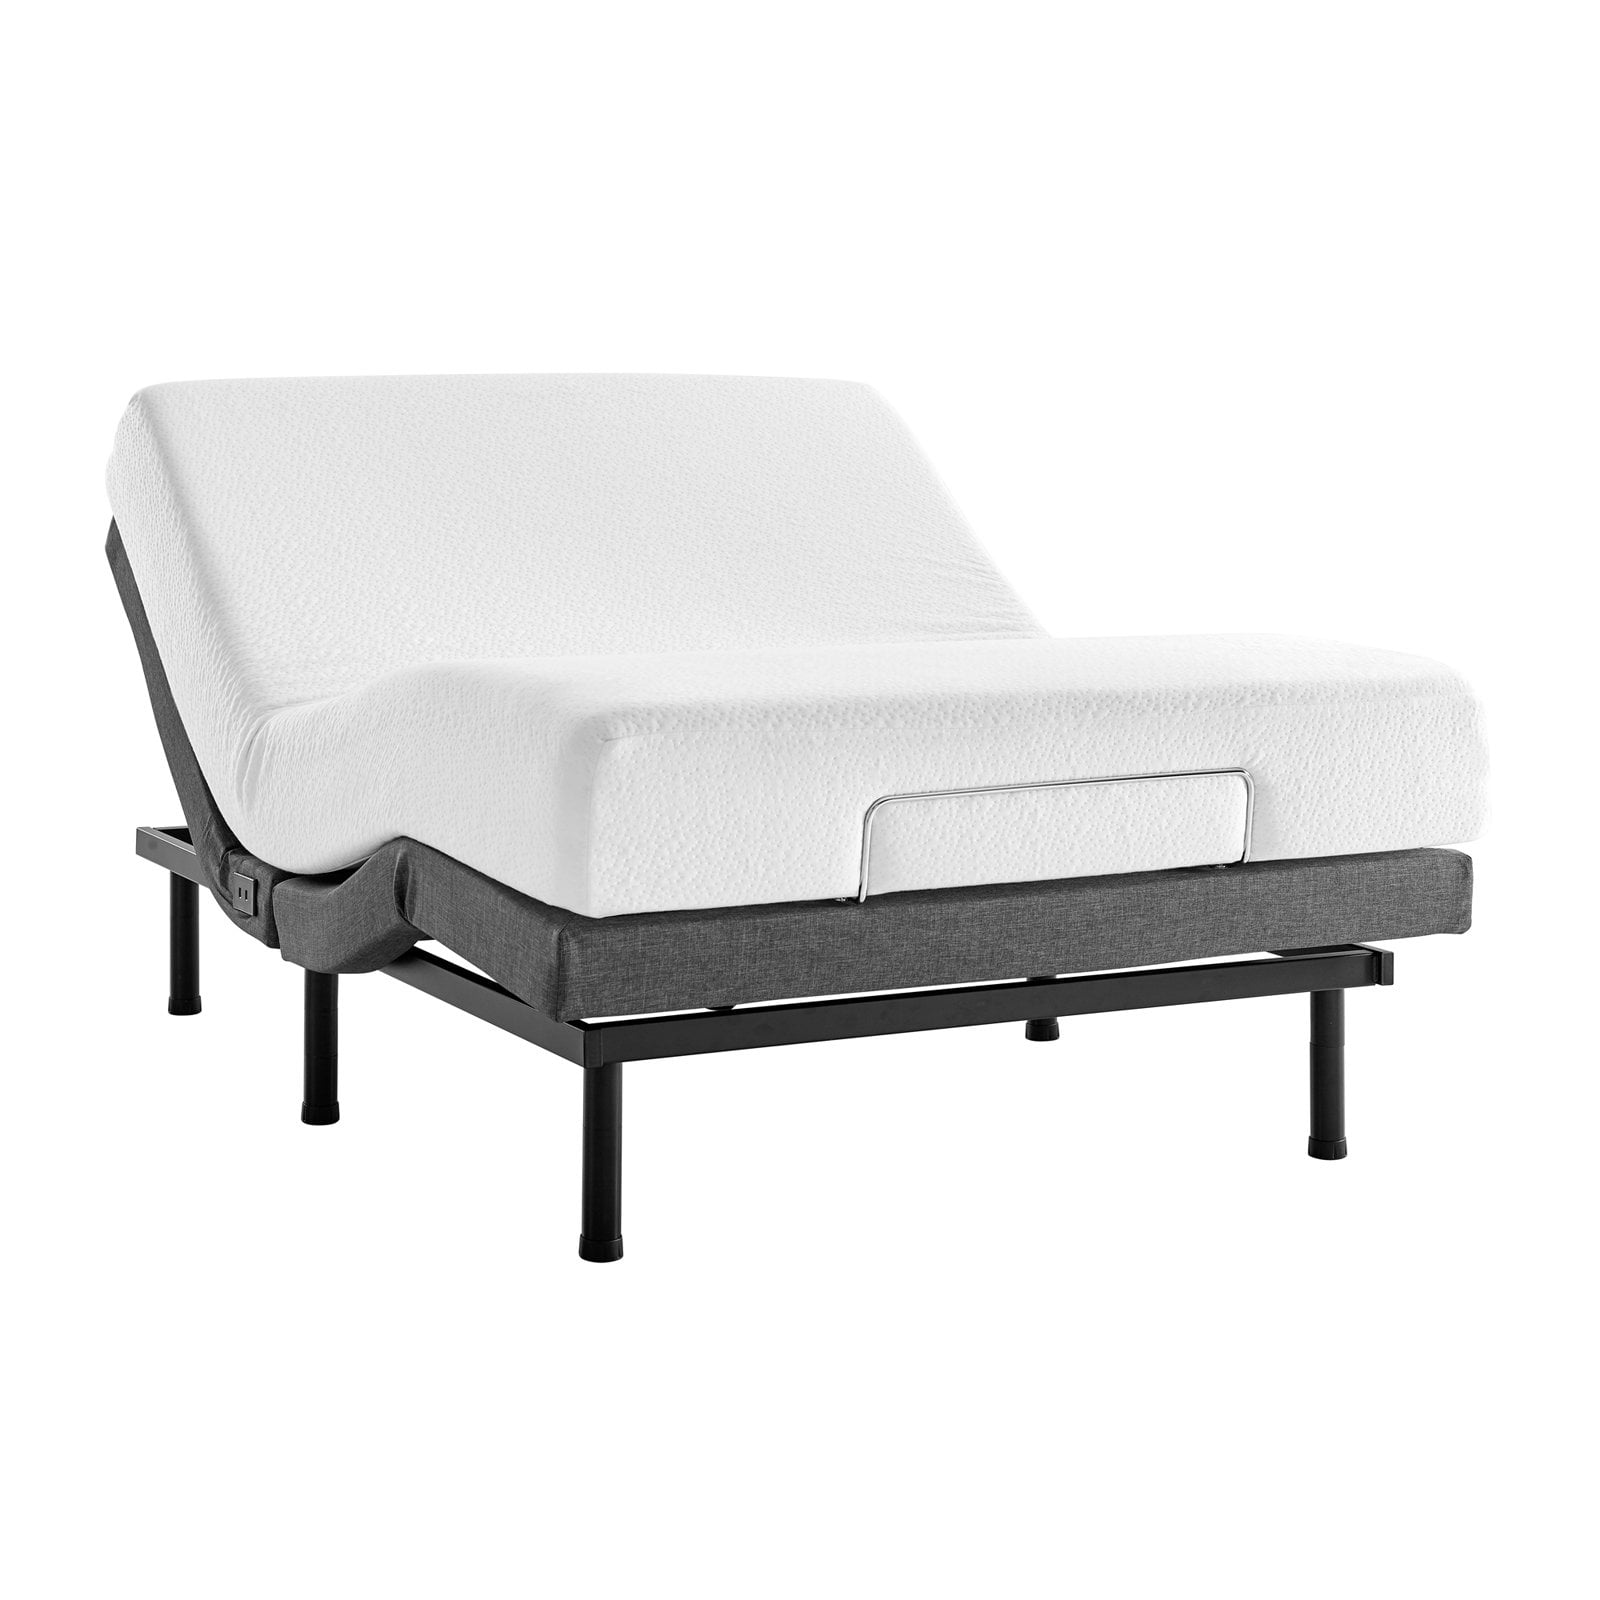  Classic Brands Adjustable Comfort Upholstered Adjustable Bed  Base with Massage, Wireless Remote, Three Leg Heights, and USB  Ports-Ergonomic, Twin XL, Dark Grey : Clothing, Shoes & Jewelry